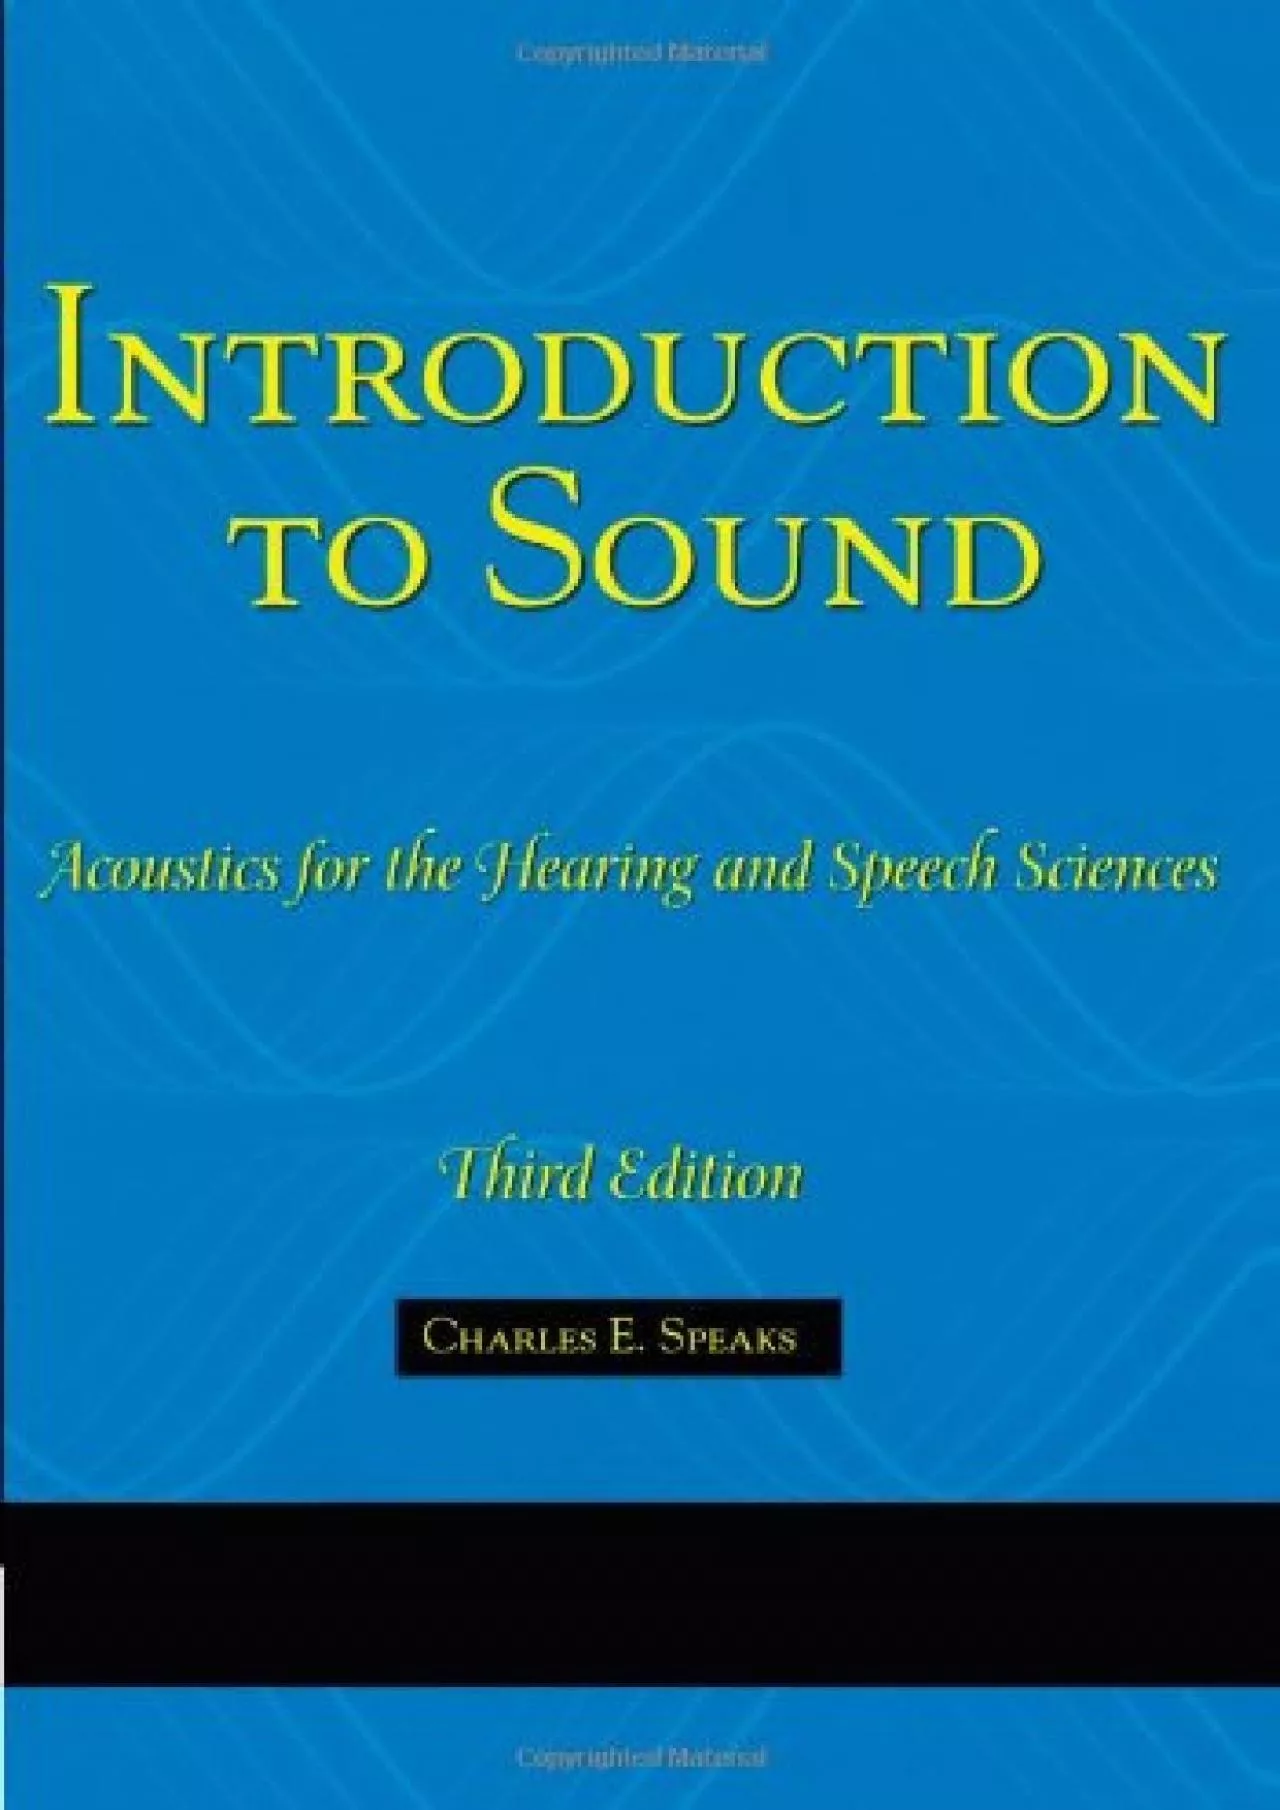 (BOOK)-Introduction To Sound: Acoustics for the Hearing and Speech Sciences (Singular